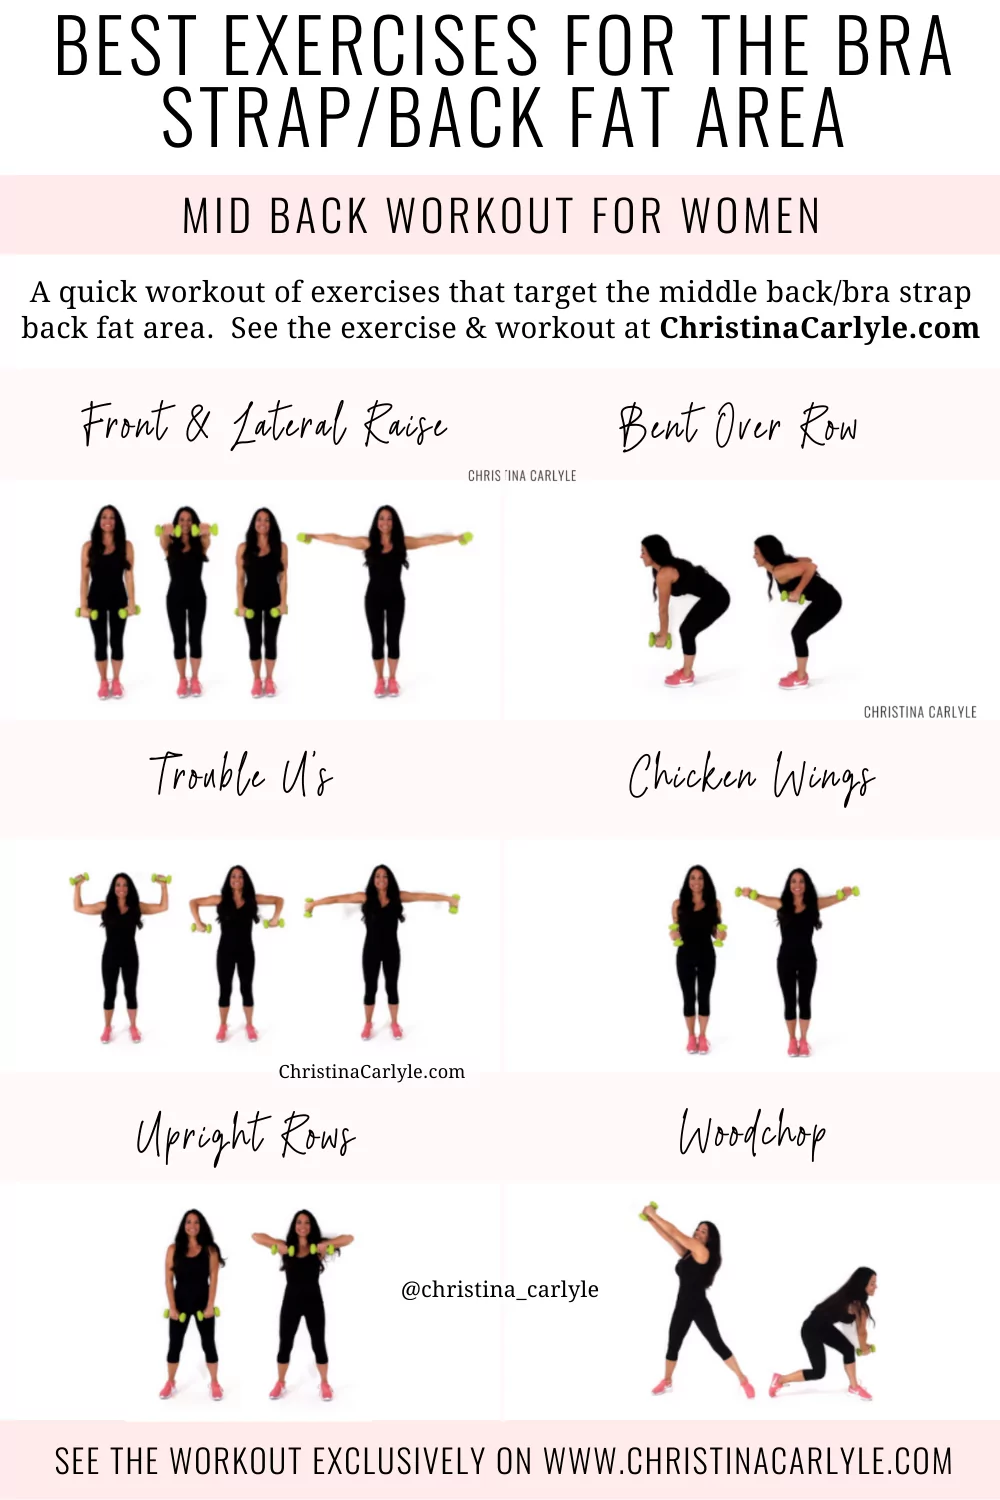 trainer Christina Carlyle doing 6 middle back exercises and text that says Exercises for bra strap back fat